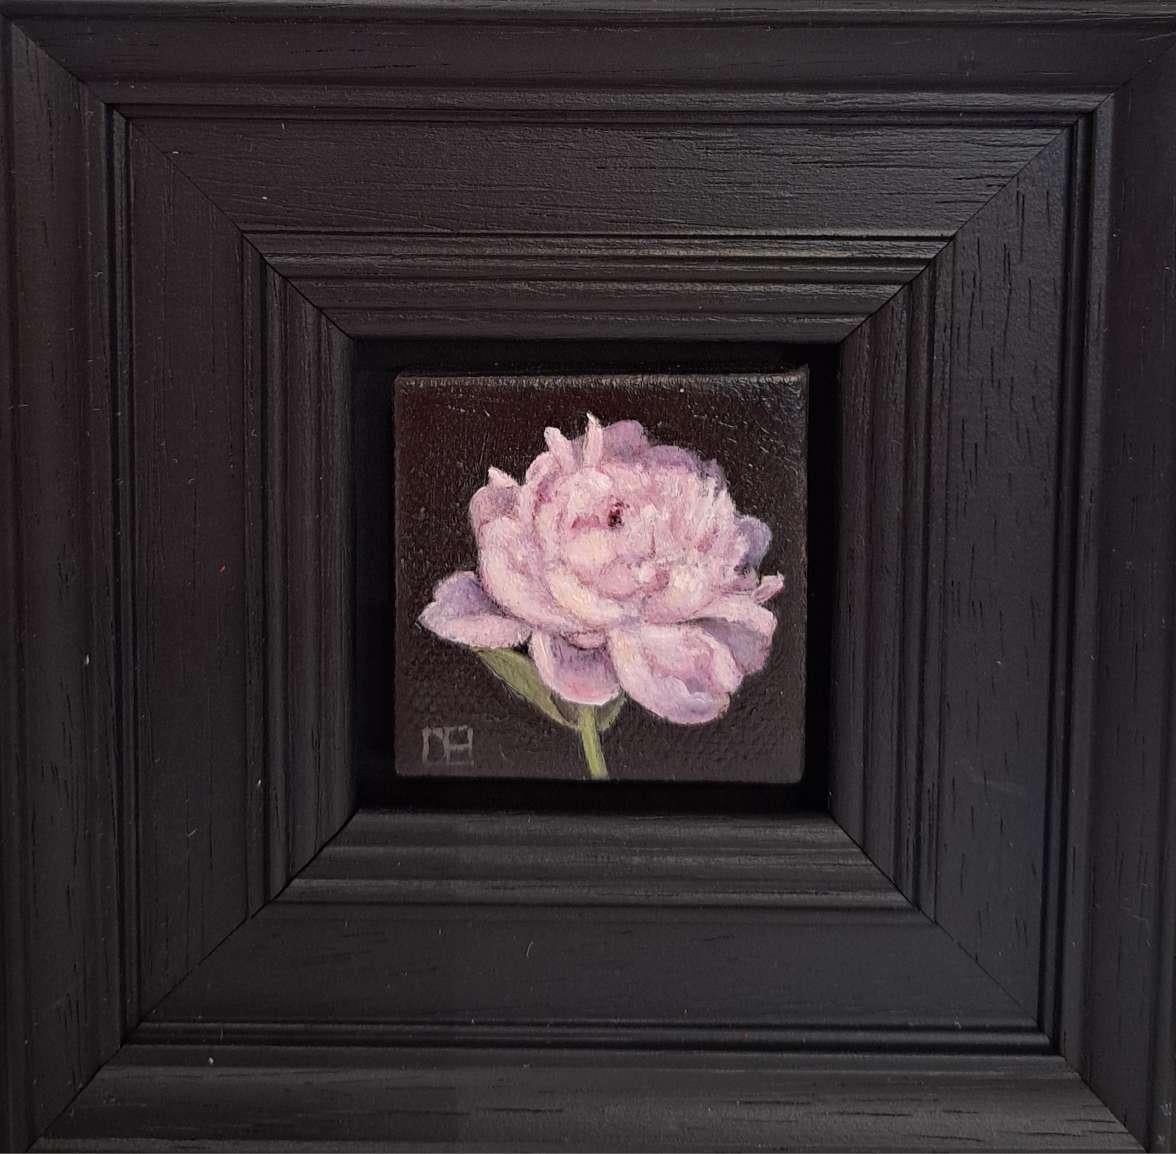 Pocket Pink Peony (c) is an original oil painting by Dani Humberstone as part of her Pocket Painting series featuring small scale realistic oil paintings, with a nod to baroque still life painting. The paintings are set in a black wood layered